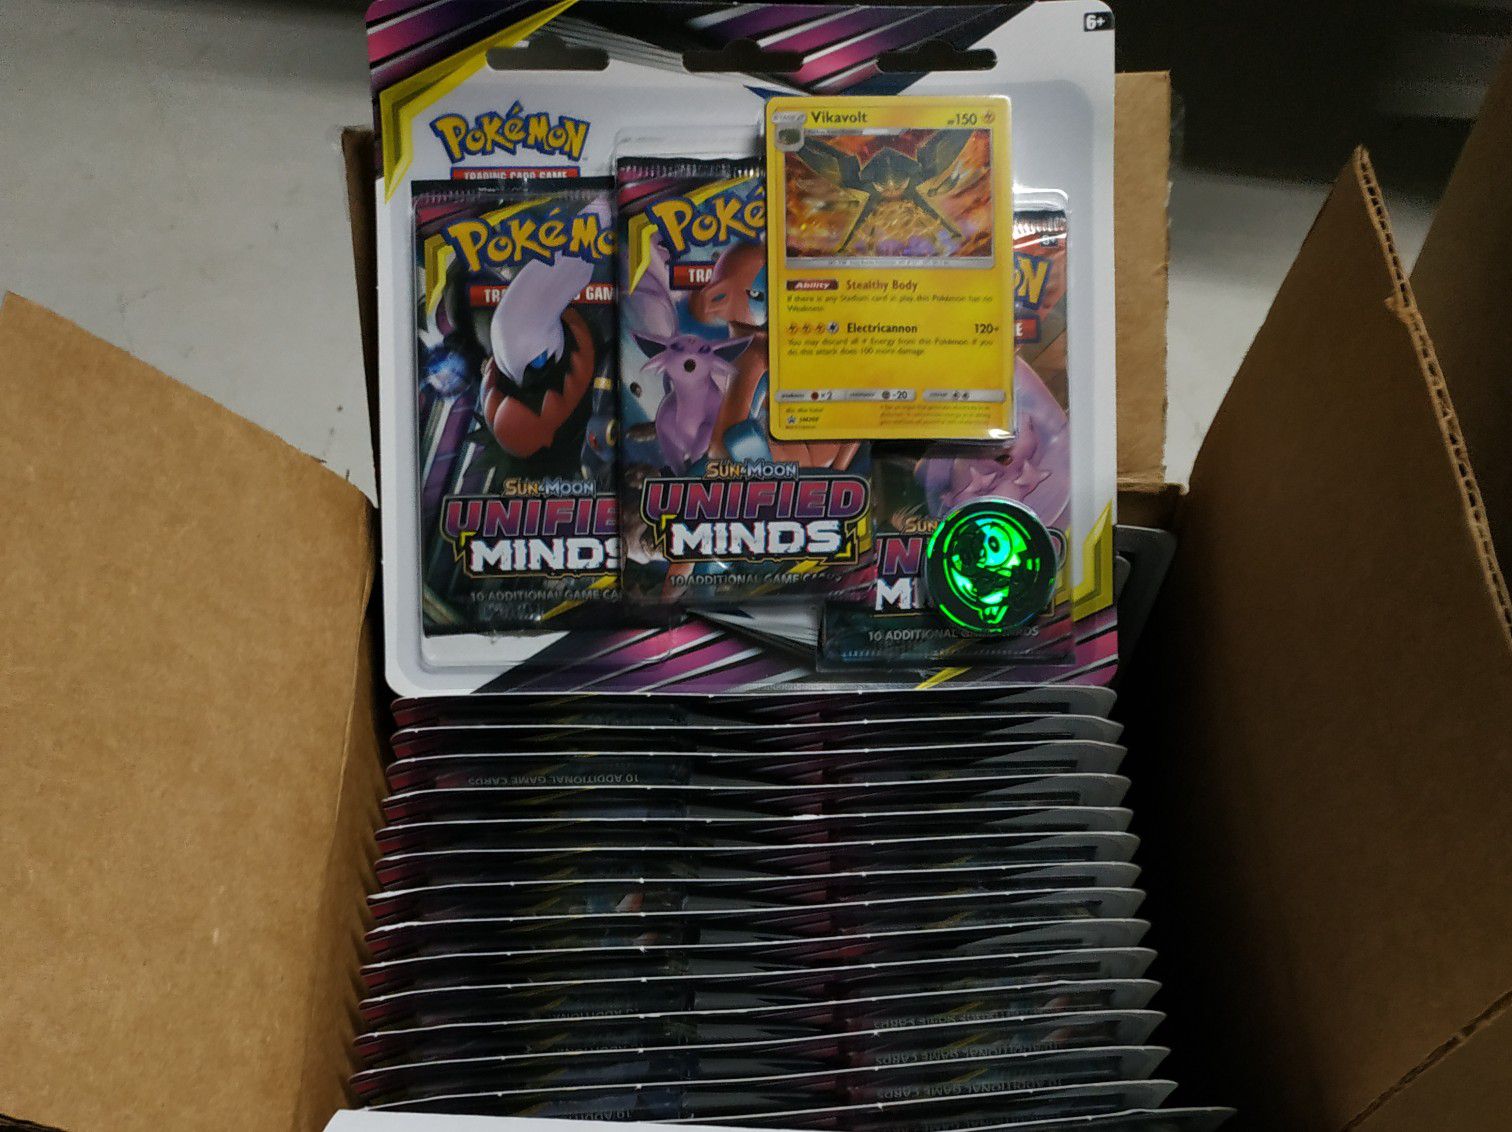 Pokemon TCG: A Box of 24 Unified Blisters Packs